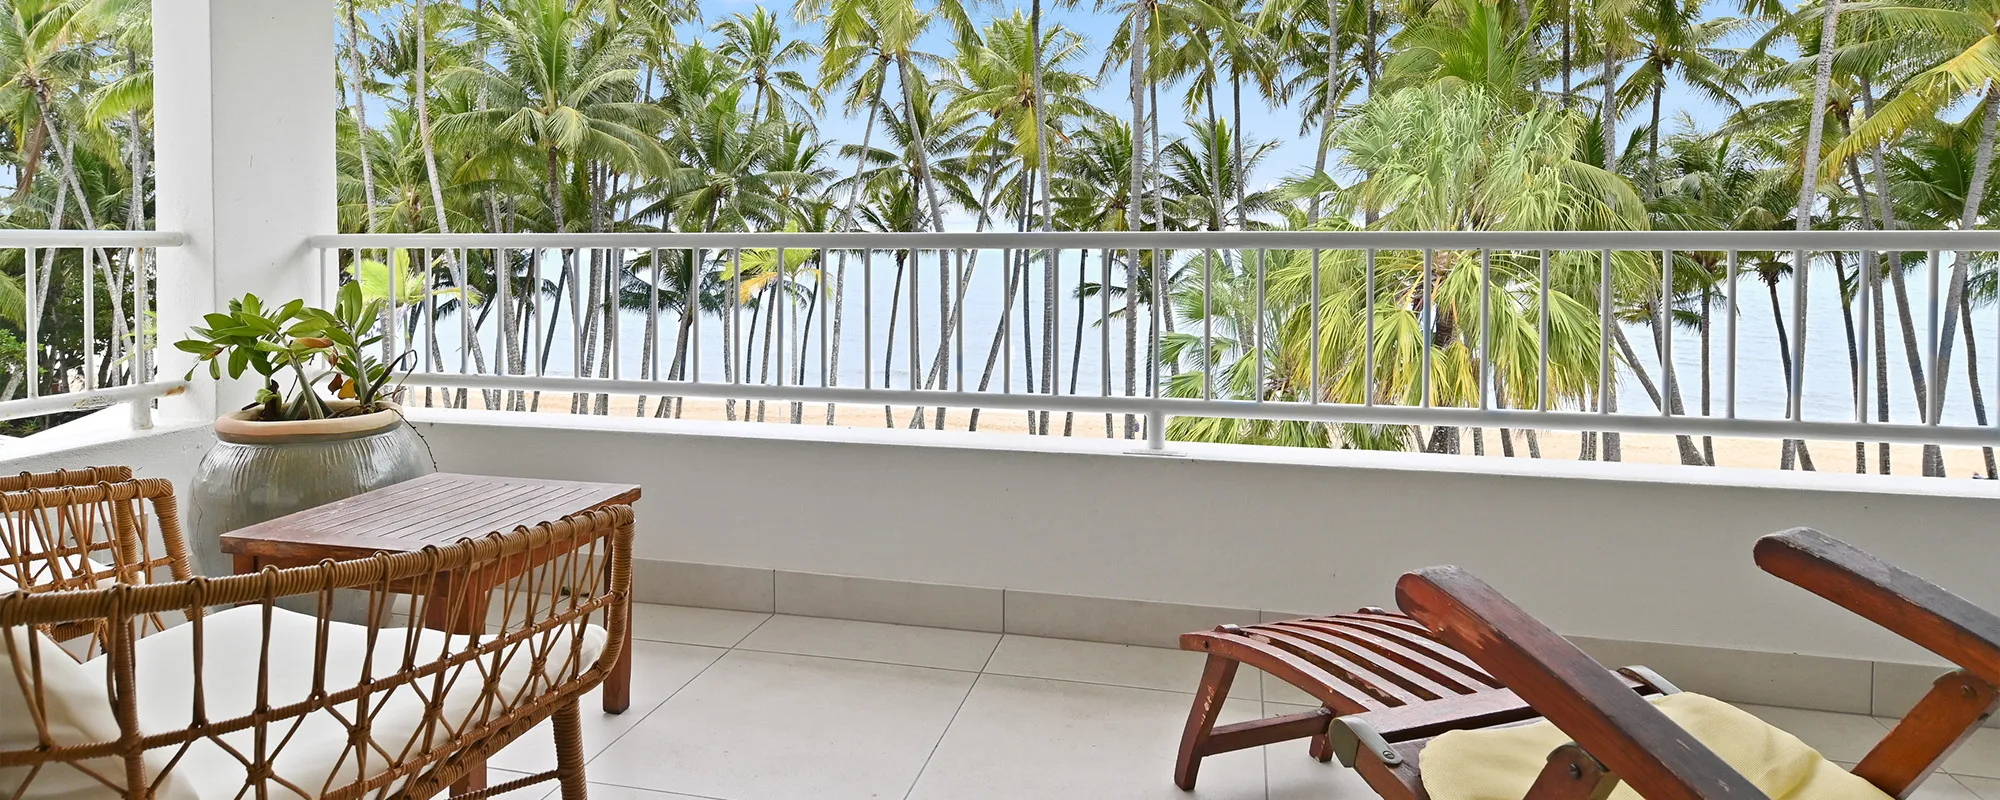 Alamanda Palm Cove by Lancemore Boutique Luxury Accommodation Four Bedroom Apartment 2000 x 800 3 v2